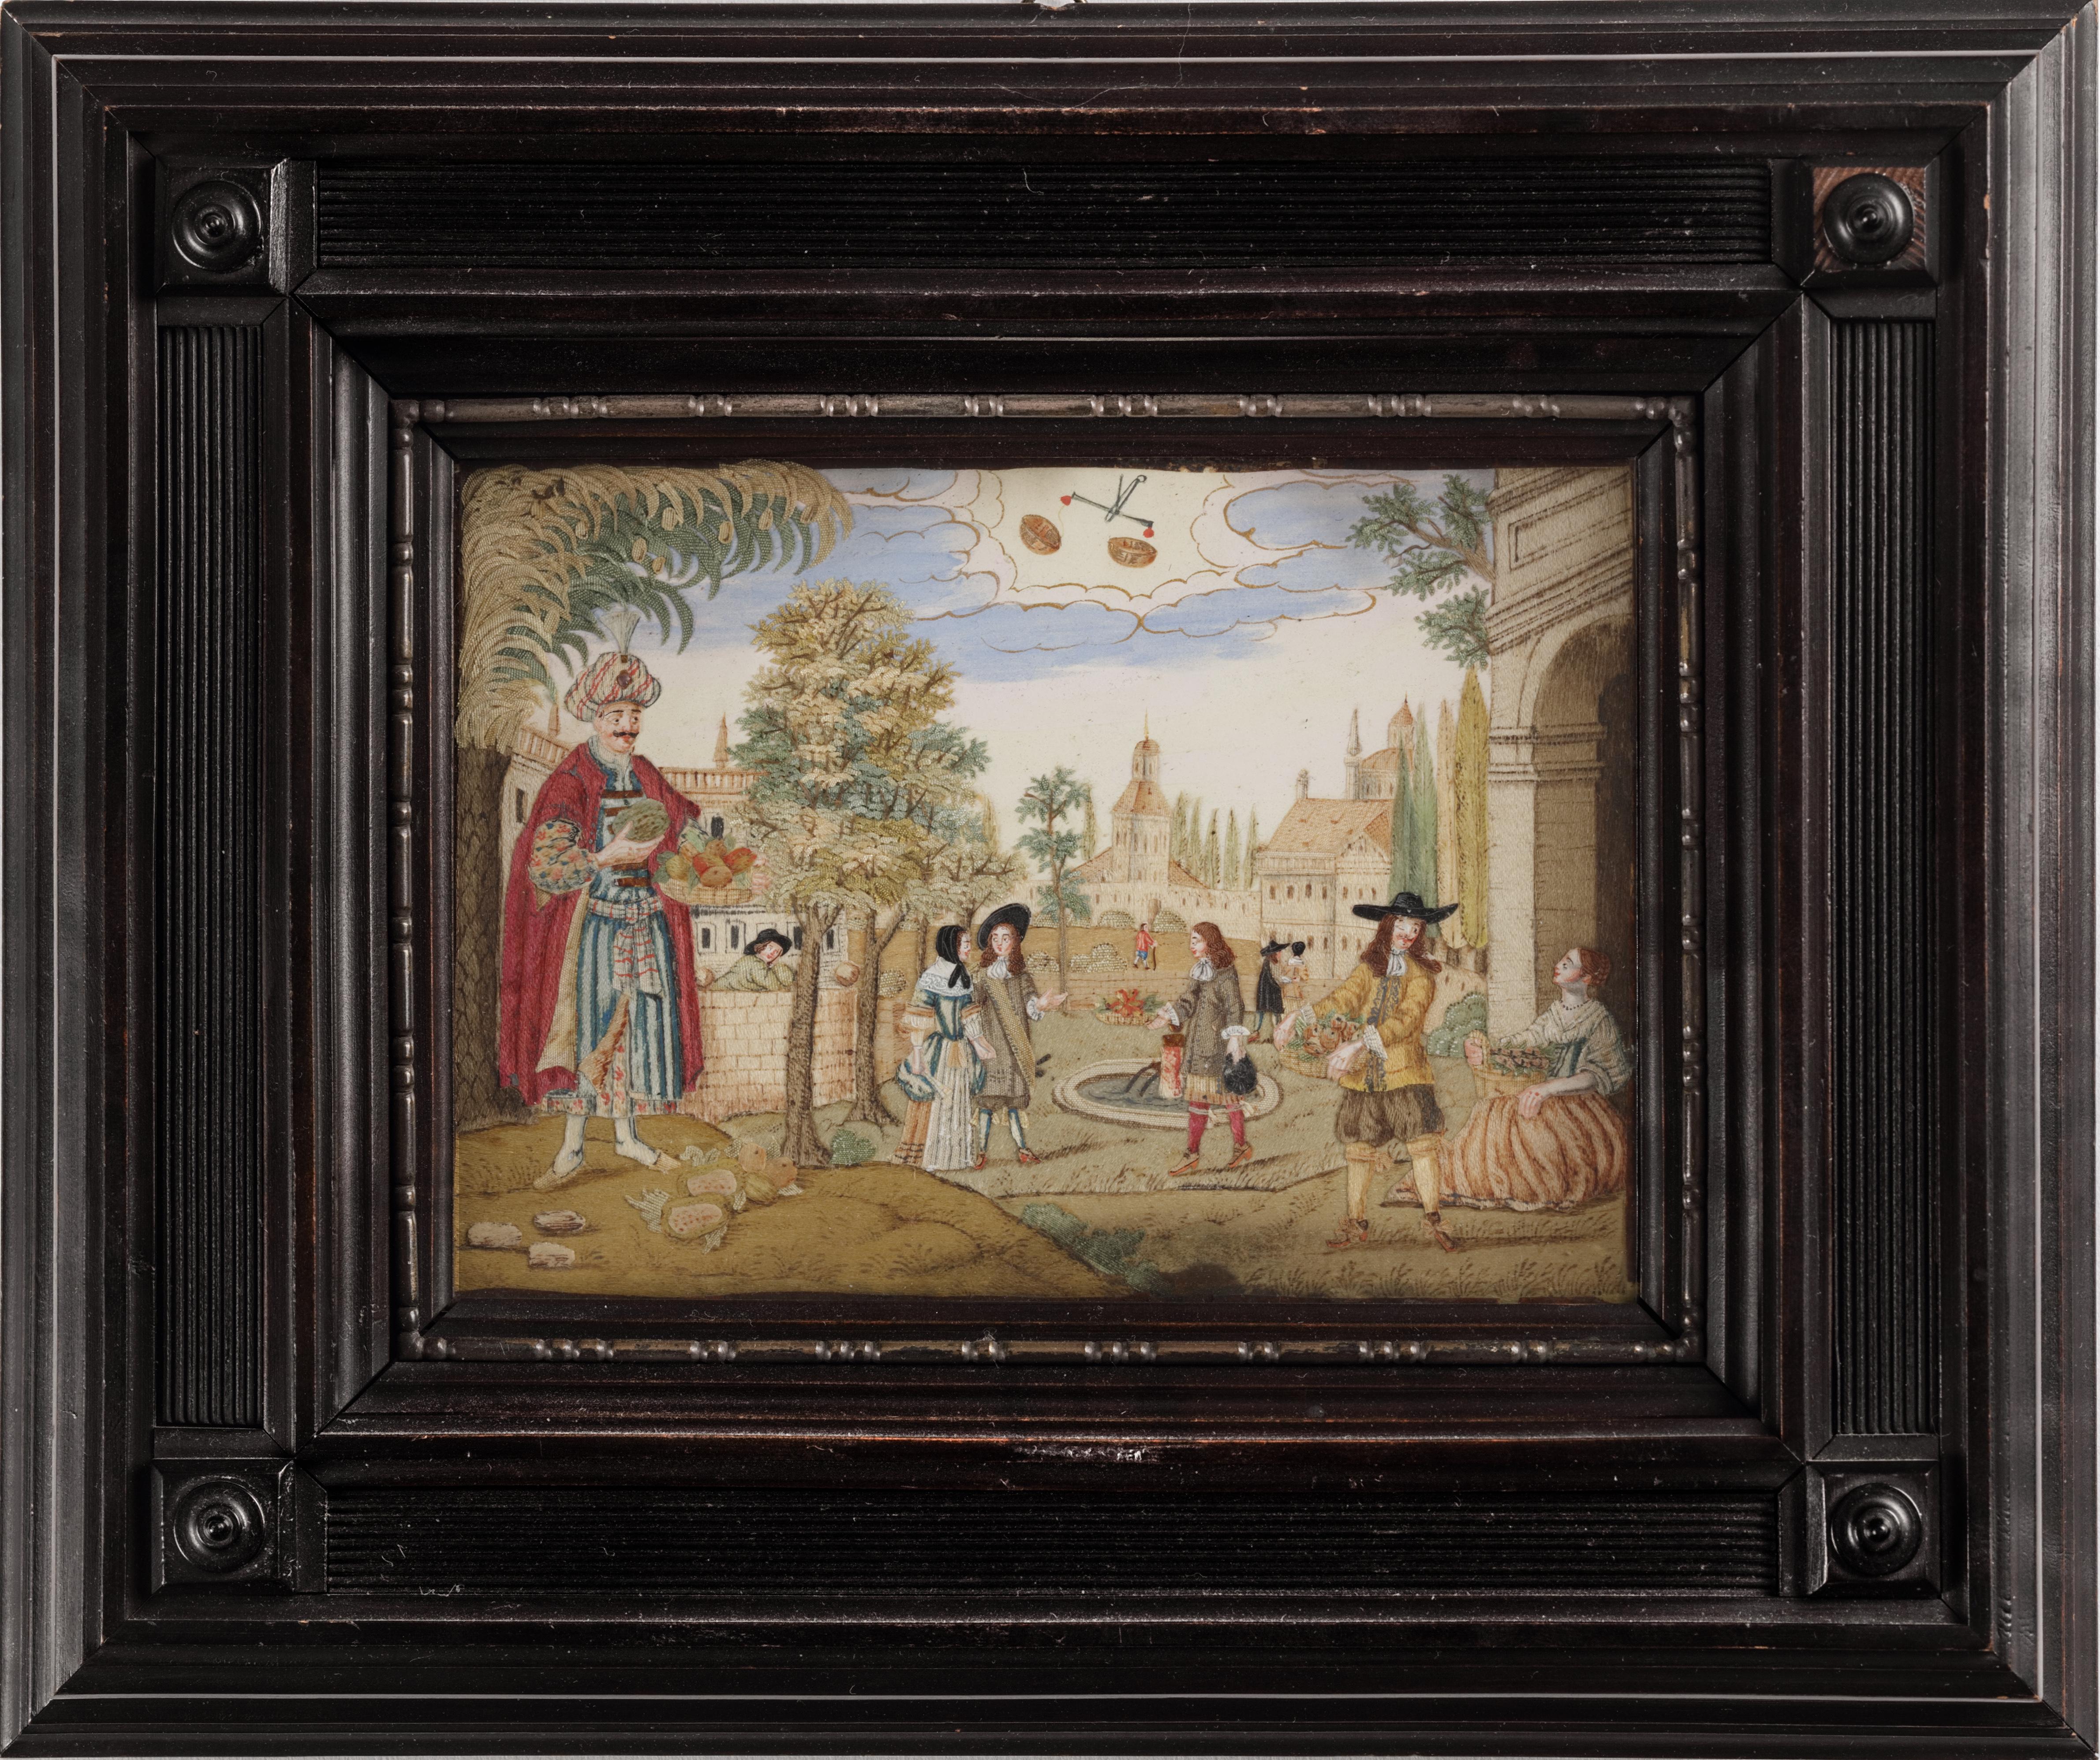 Two exceptional folk-art pictures (of a series of twelve), depicting signs of the Zodiac

South Germany or Tirol, 18th century

Various textiles and fibres applied to painted paper, 9.7 x 13.5 cm (including frame: 20 x 25 cm)

Under the sign